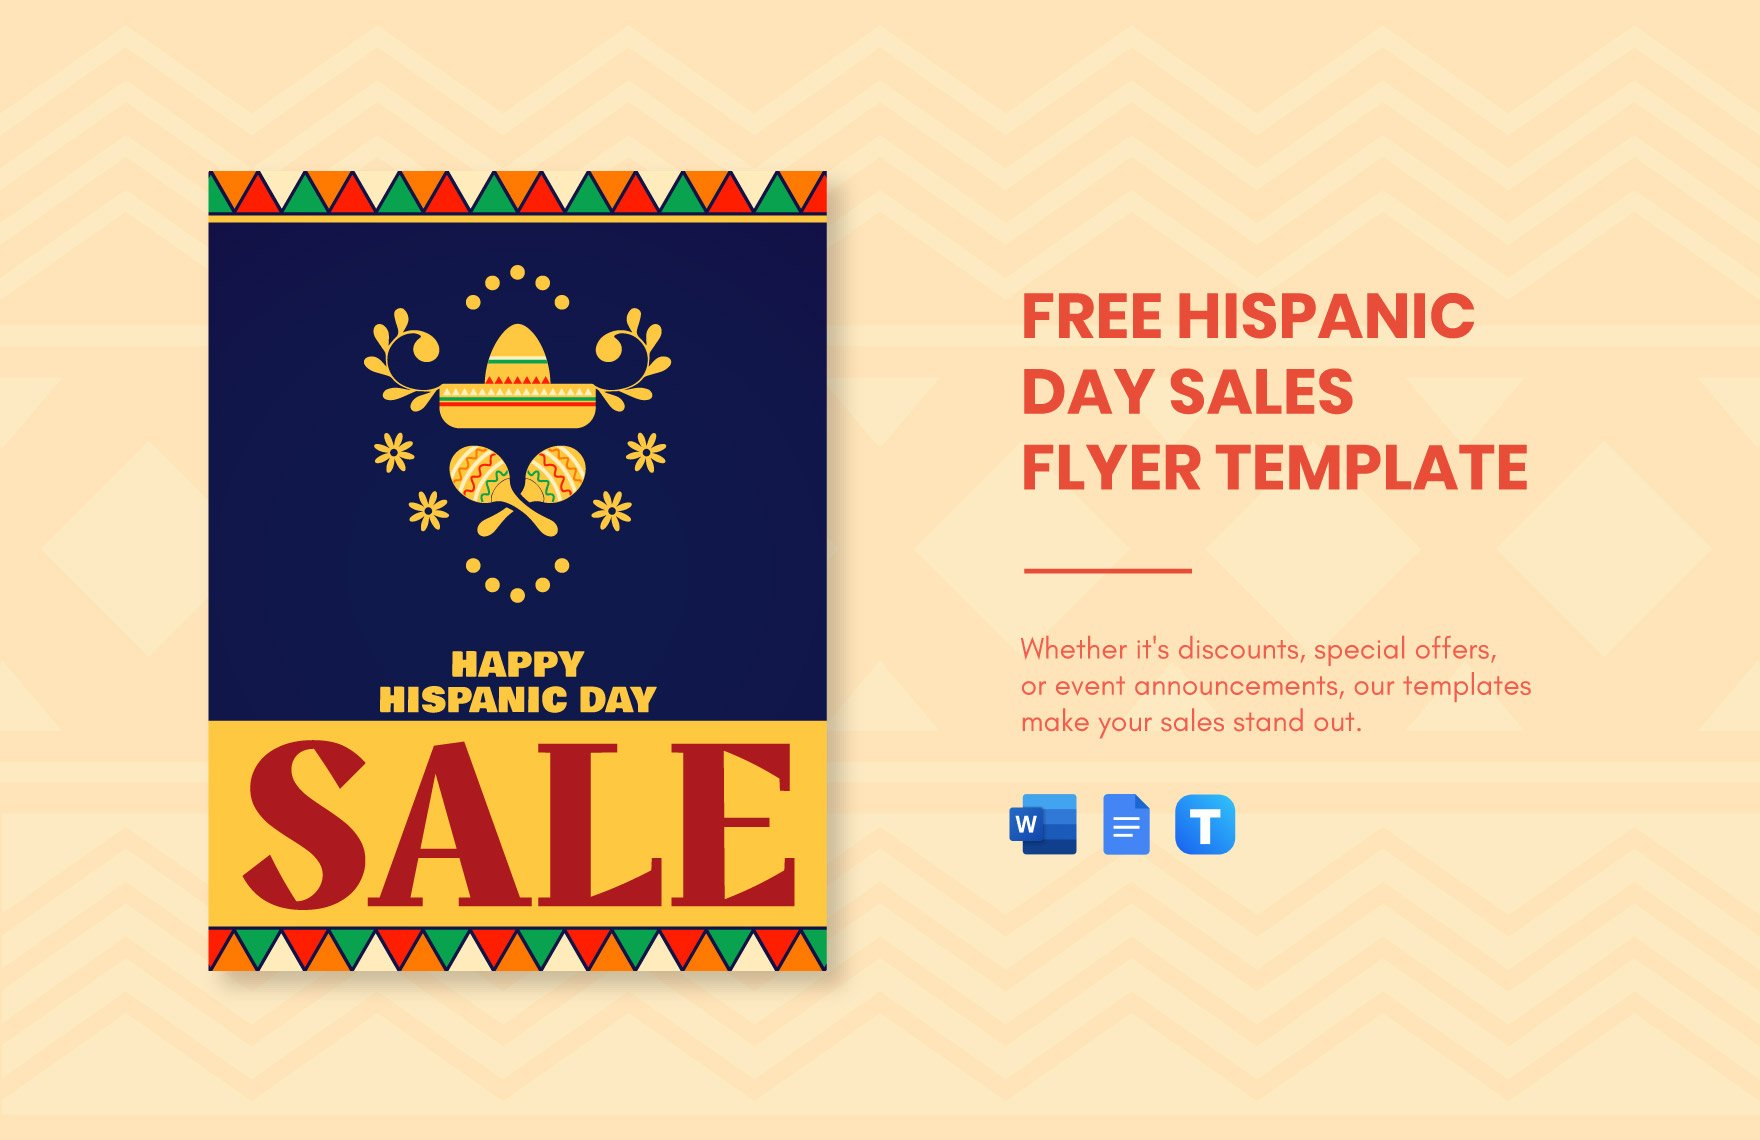 Free Hispanic Day Sales Flyer Template in Word, Google Docs